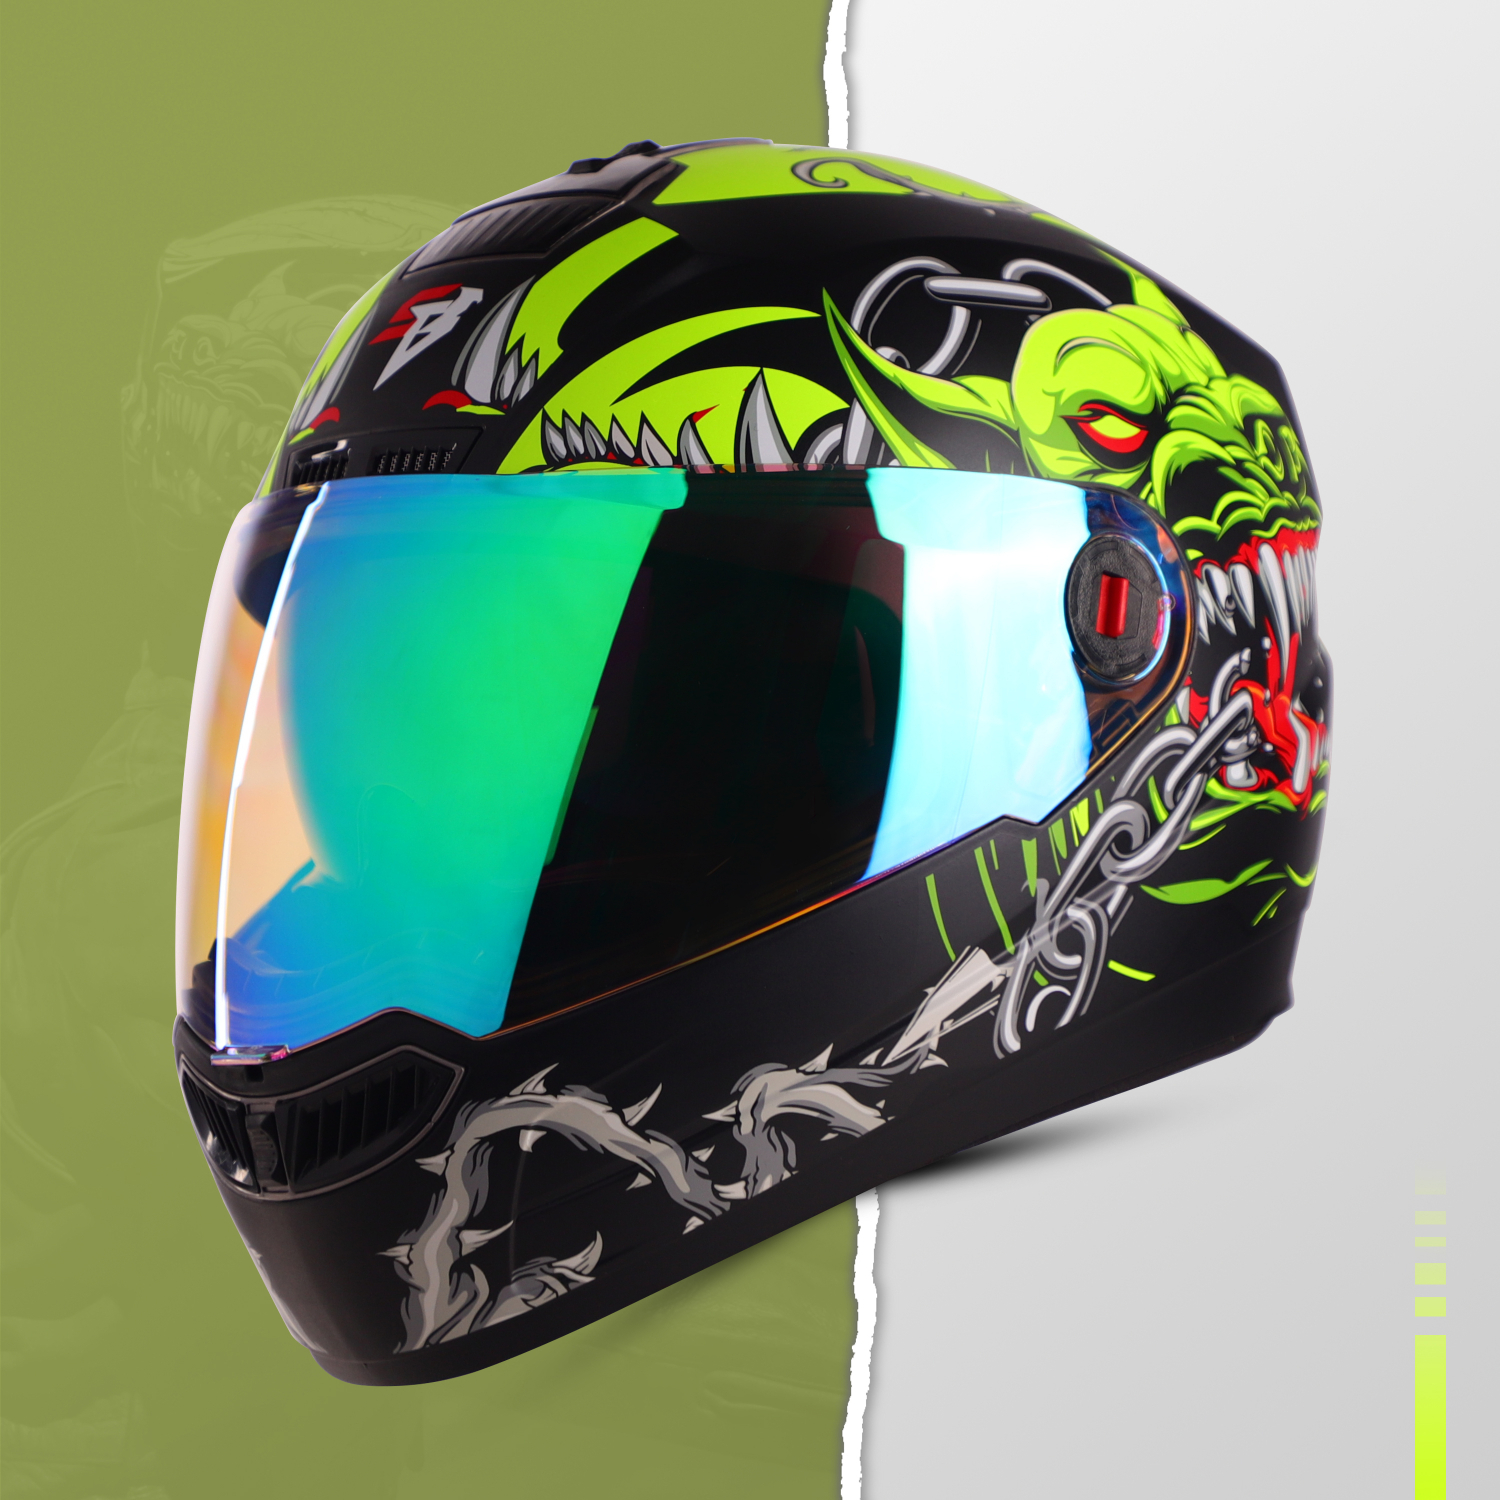 Steelbird SBA-1 Angry Dog ISI Certified Full Face Graphic Helmet For Men And Women With Inner Smoke Sun Shield (Glossy Black Neon With Night Vision Green Visor)